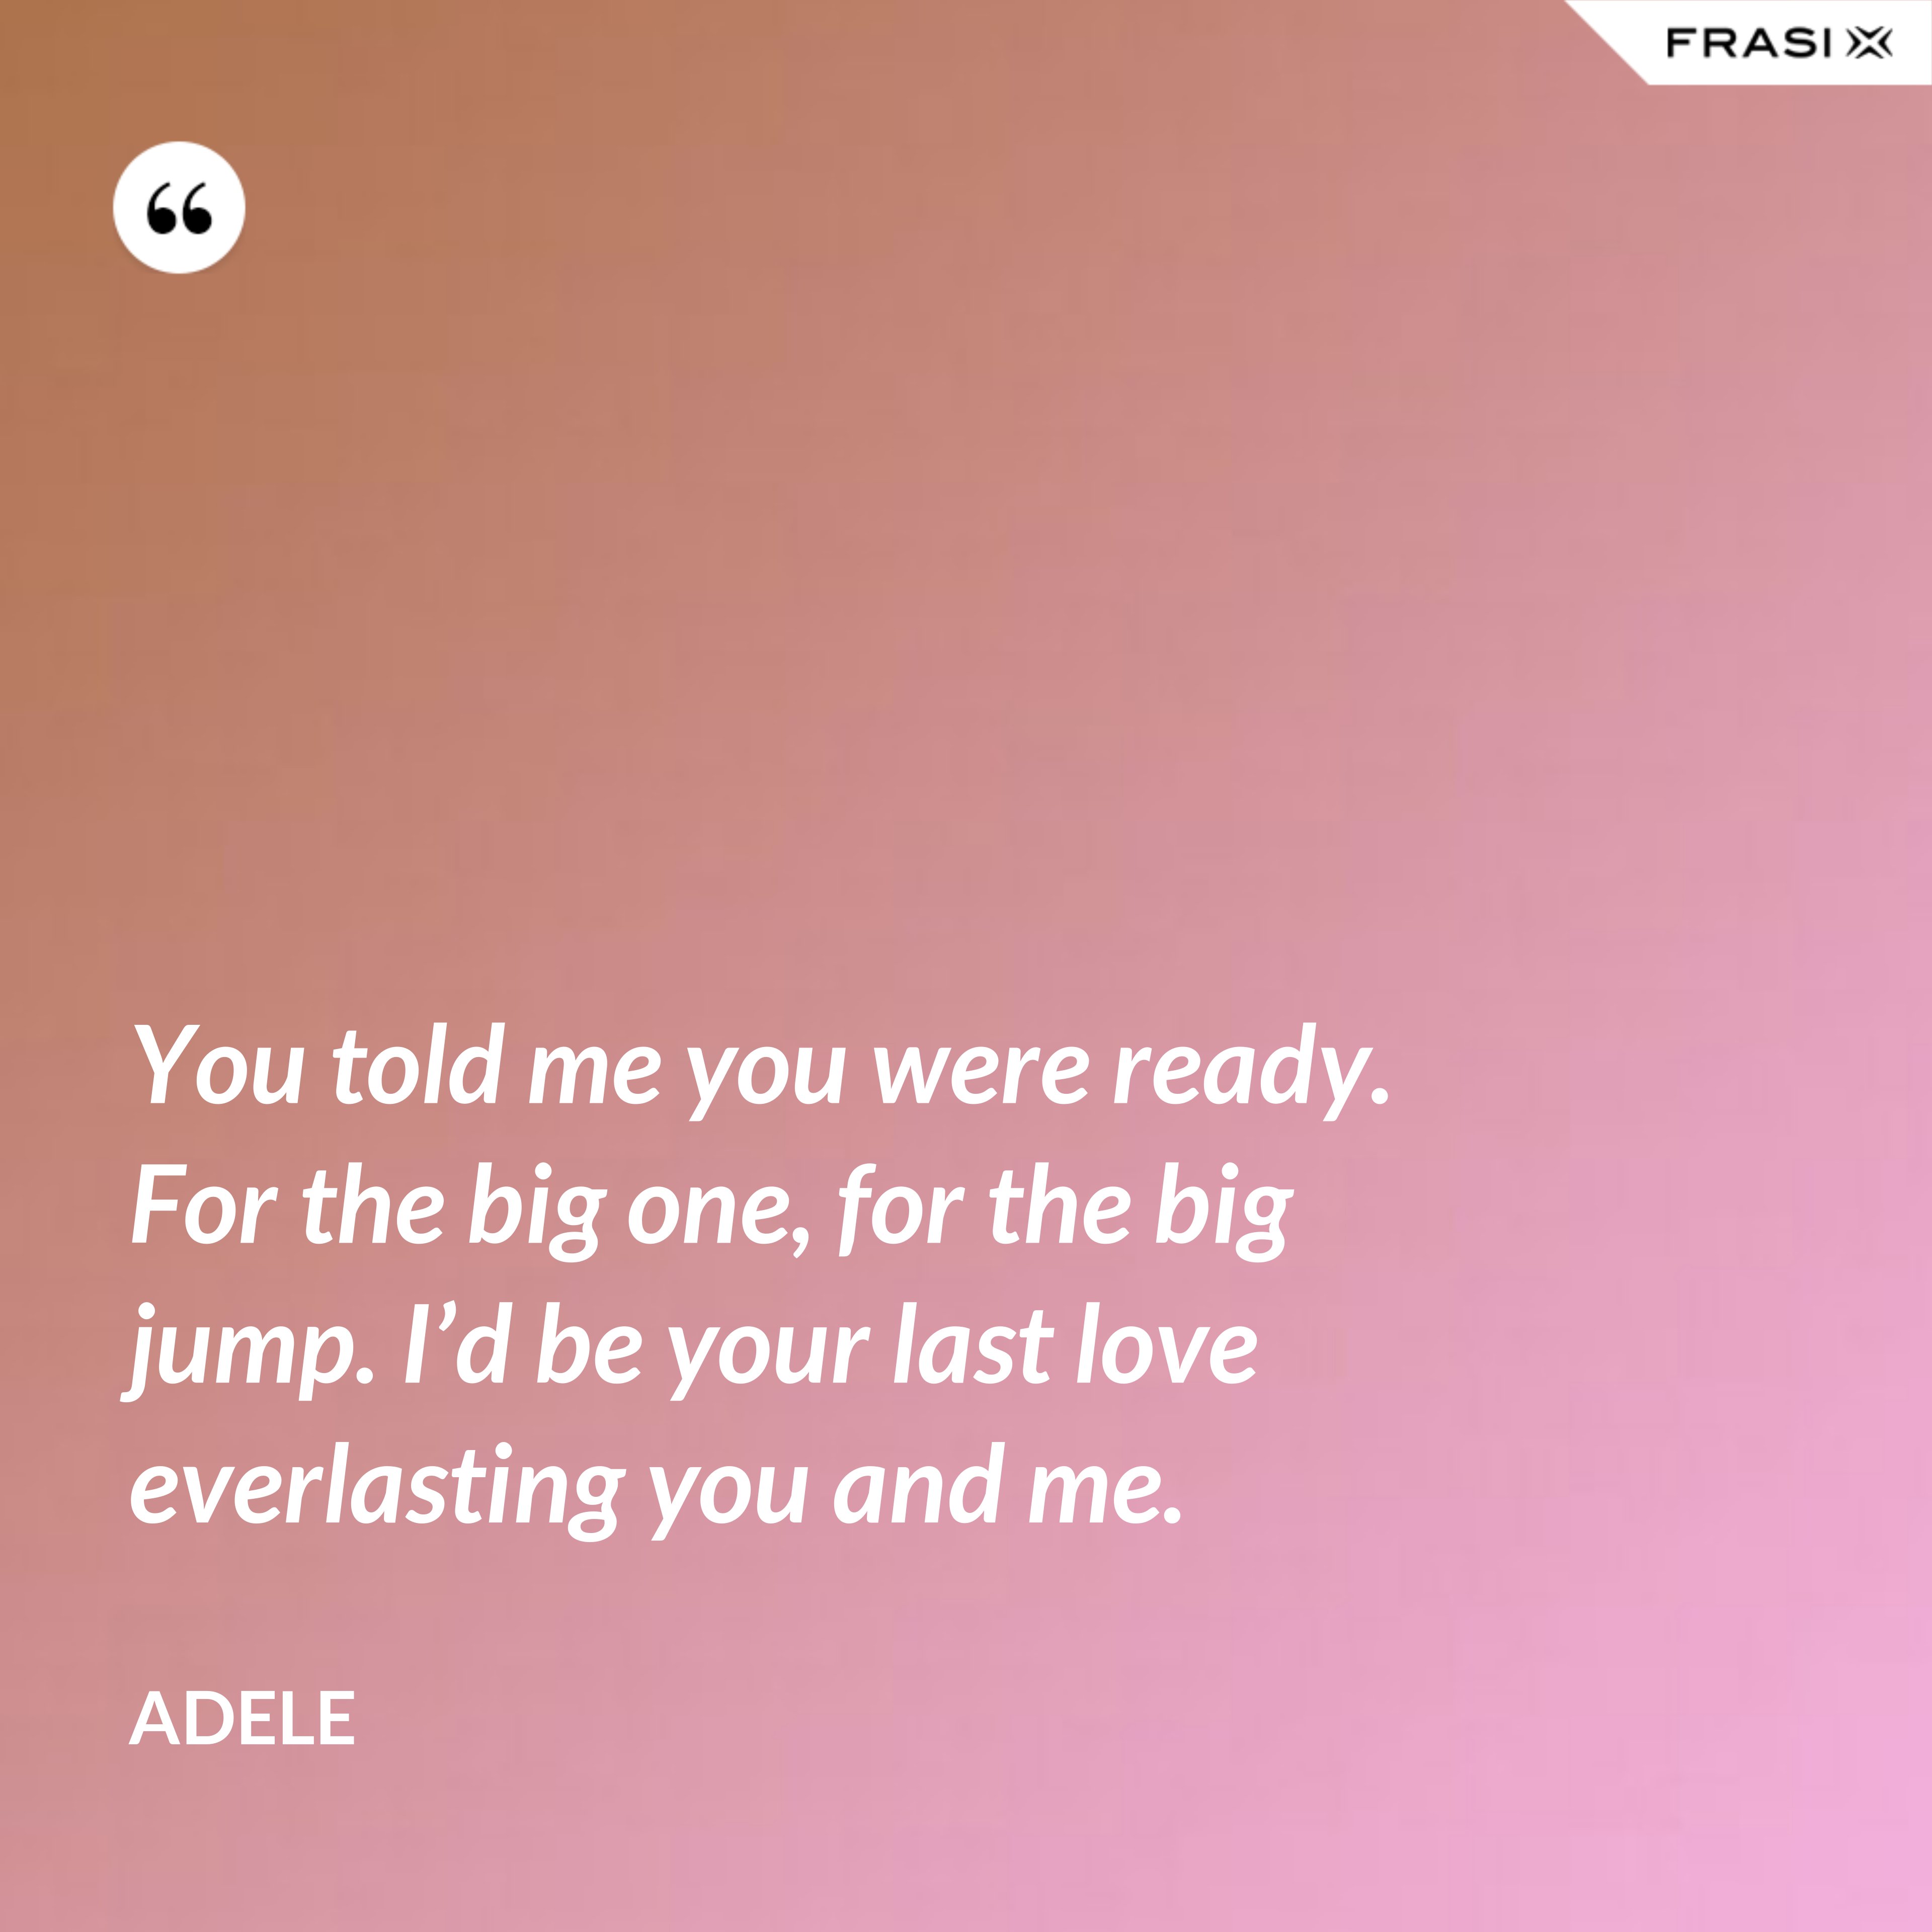 You told me you were ready. For the big one, for the big jump. I’d be your last love everlasting you and me. - Adele